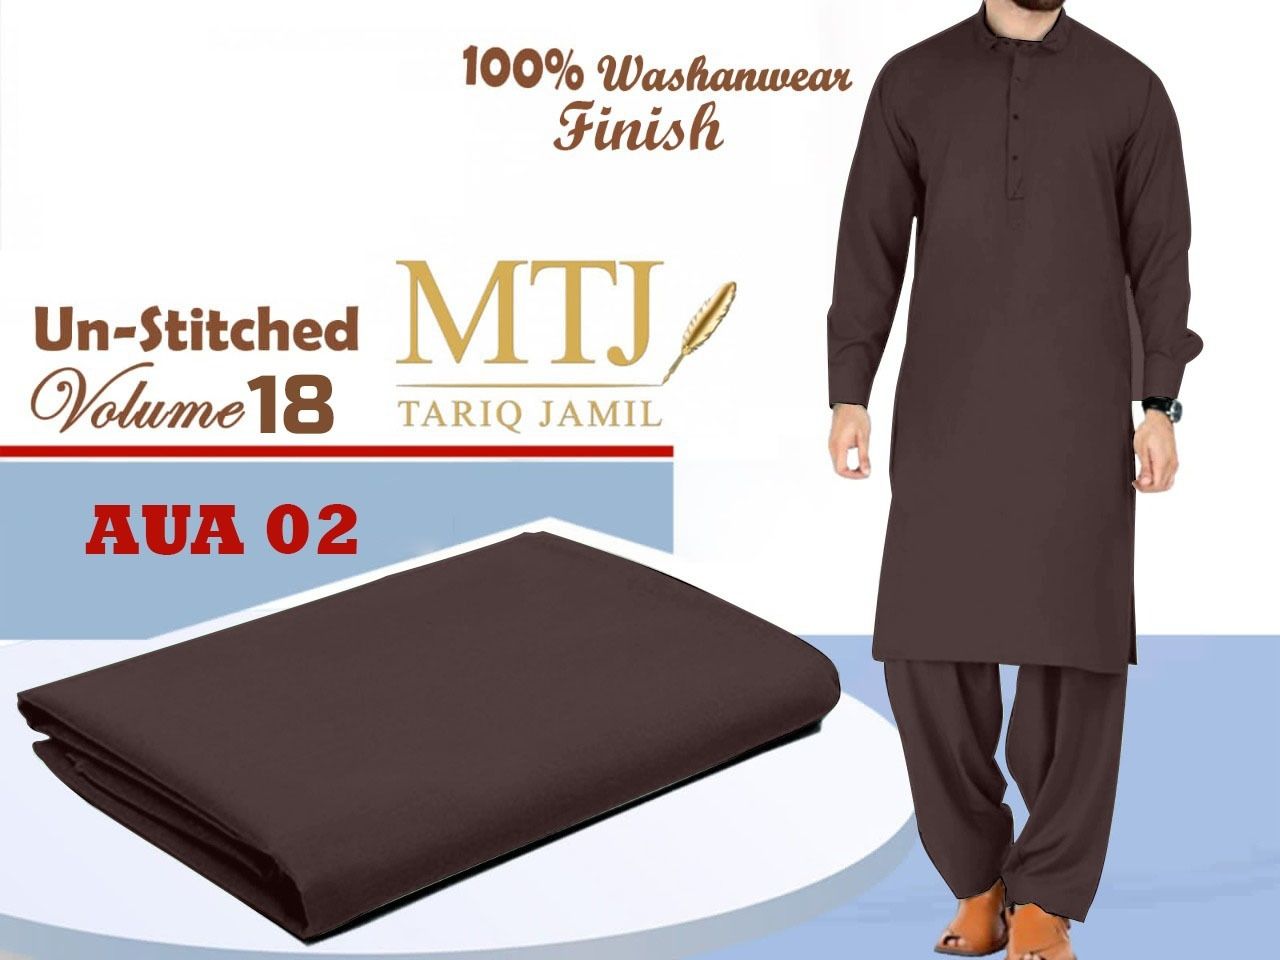 MEN'S UNSTITCHED WASH AND WEAR SUIT (4 METER FABRIC) WIDER WIDTH